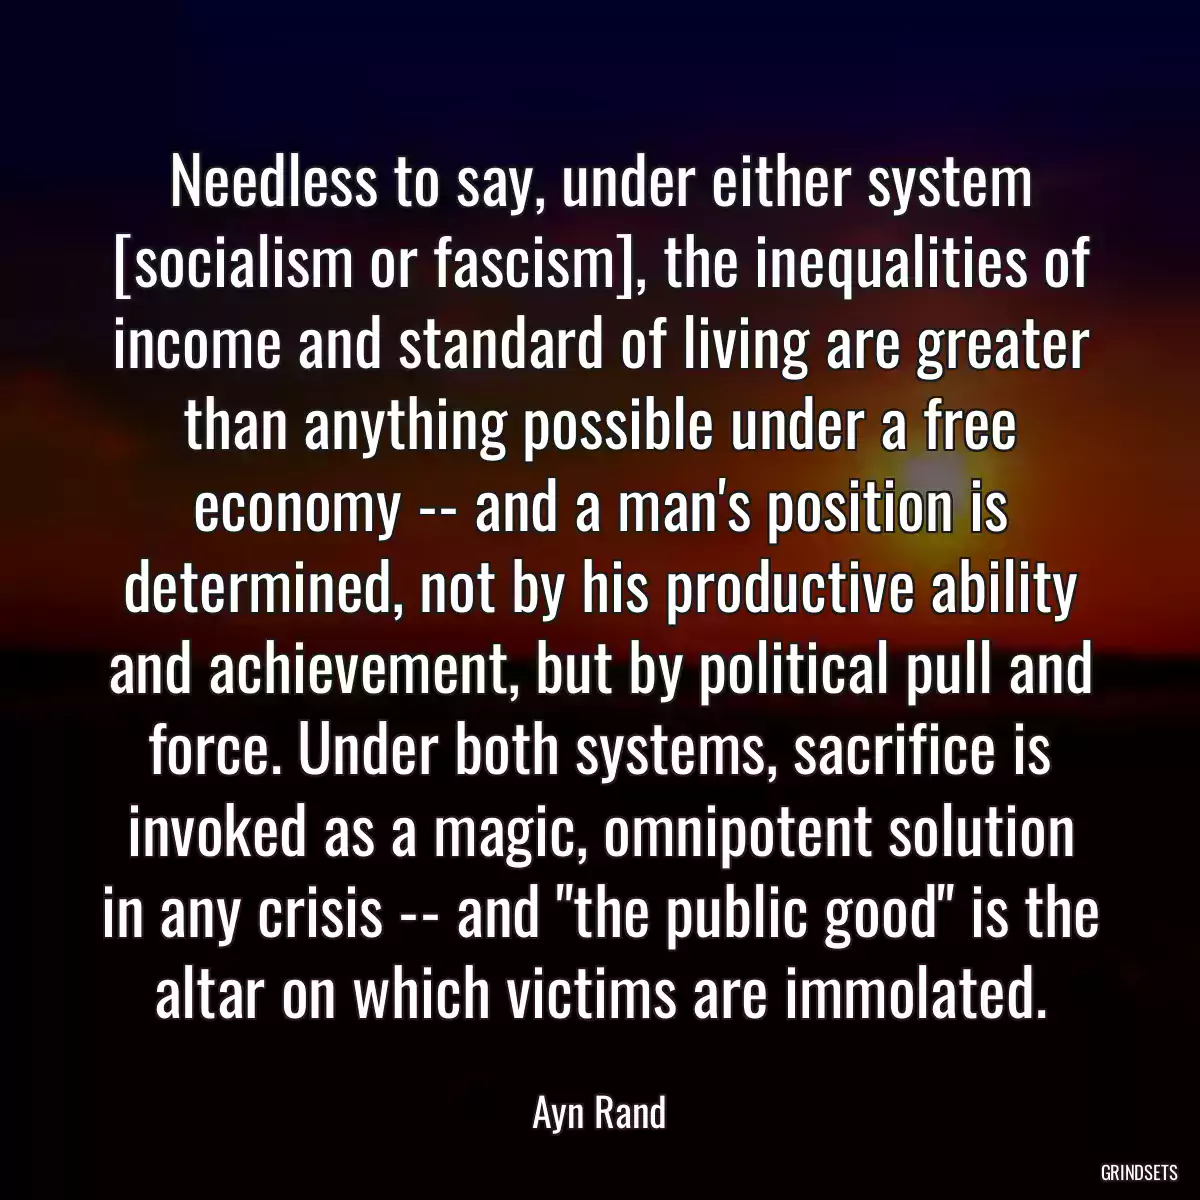 Needless to say, under either system [socialism or fascism], the inequalities of income and standard of living are greater than anything possible under a free economy -- and a man\'s position is determined, not by his productive ability and achievement, but by political pull and force. Under both systems, sacrifice is invoked as a magic, omnipotent solution in any crisis -- and \